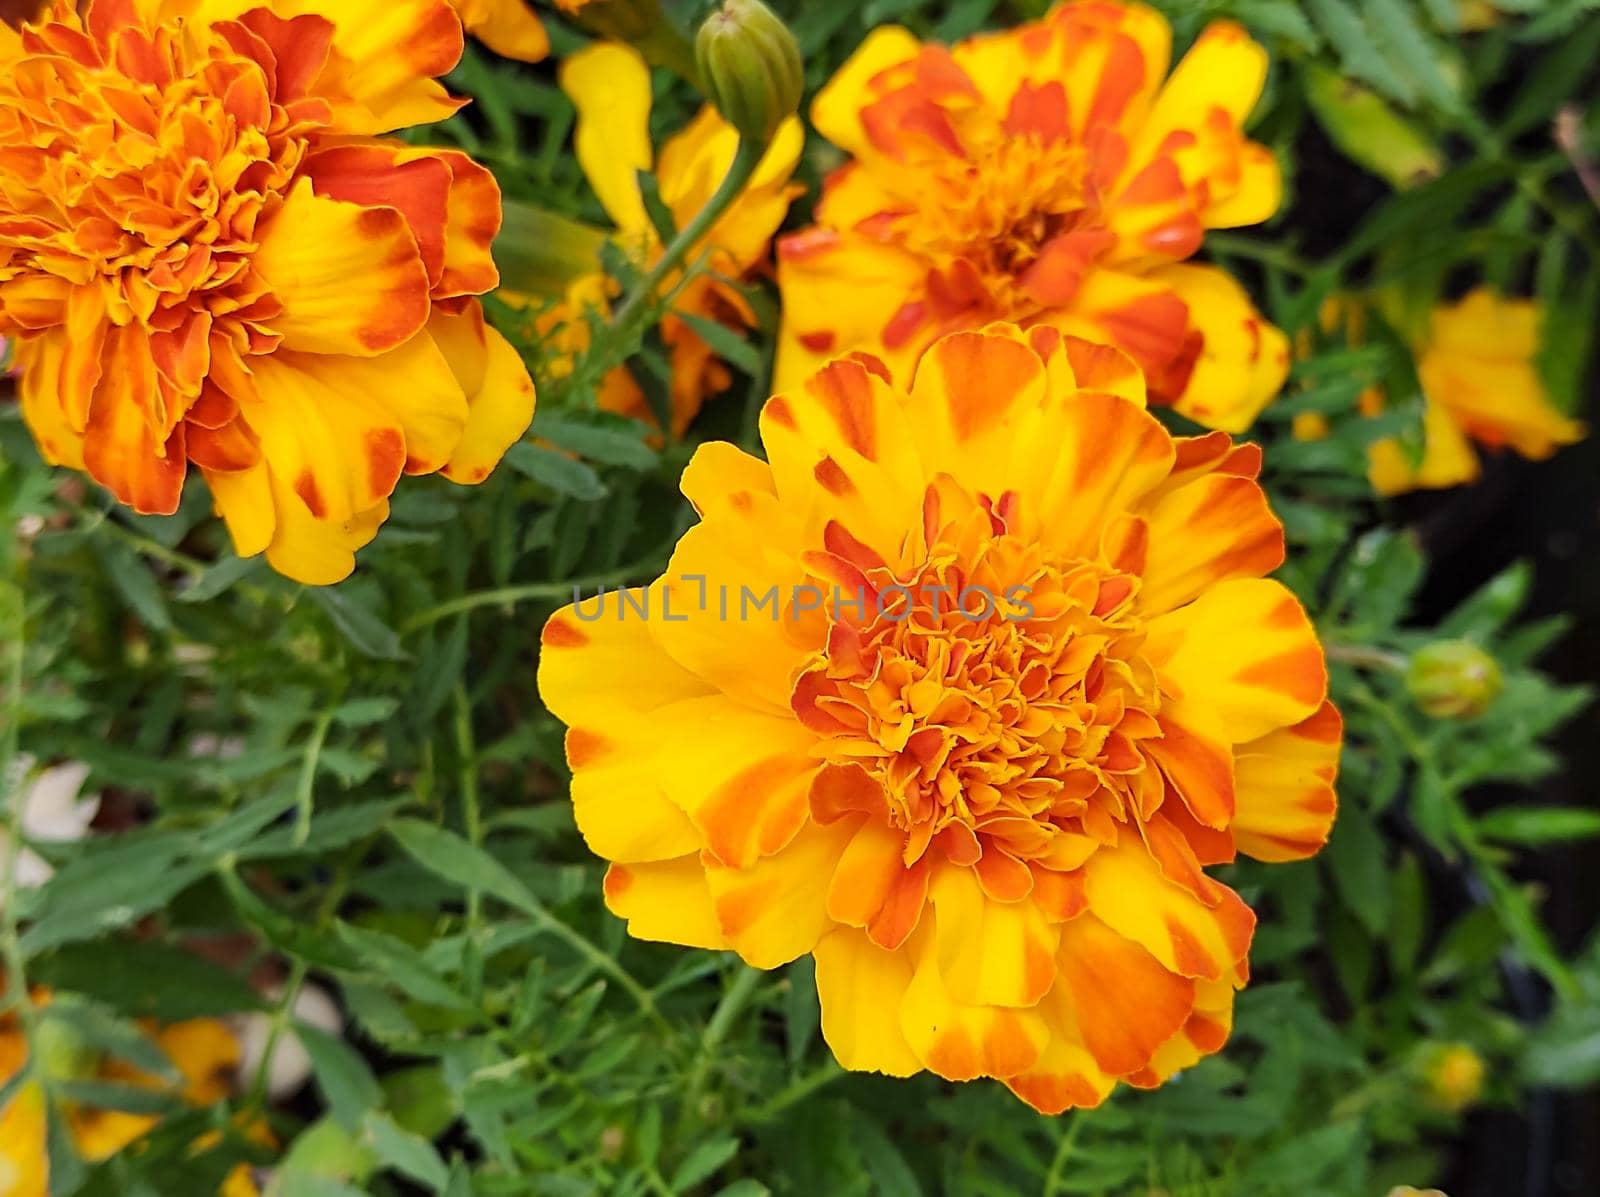 Flowers and leaves of the yellow orange tagete (Marigold) or yellow carnation flower. by silviopl